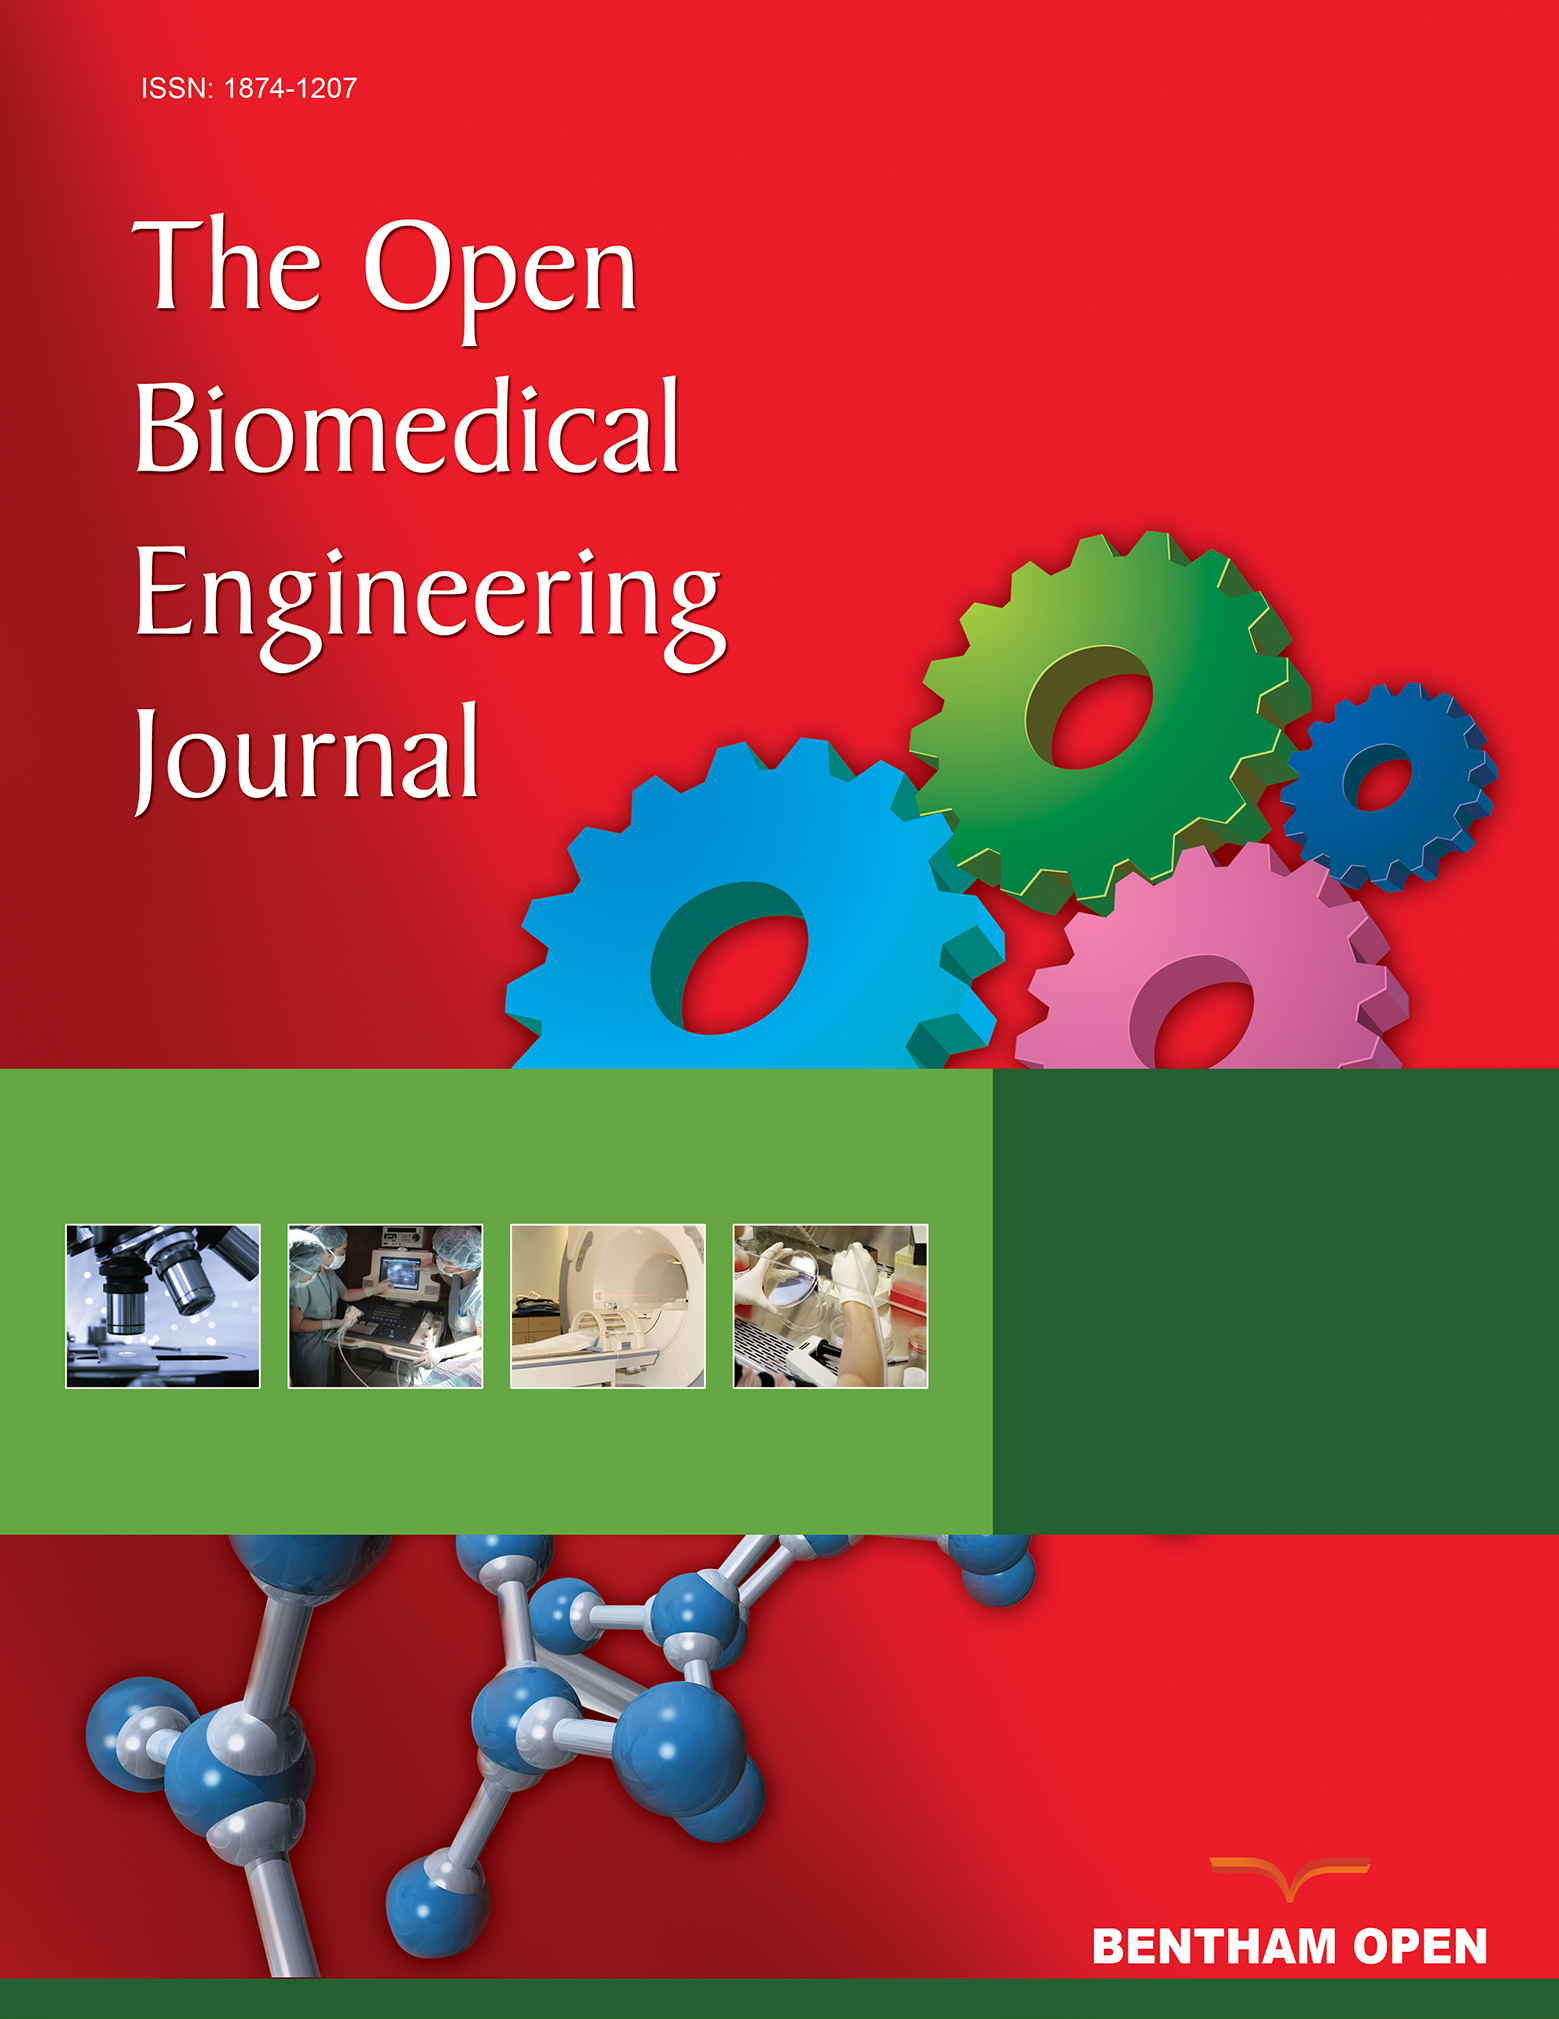 The Open Biomedical Engineering Journal